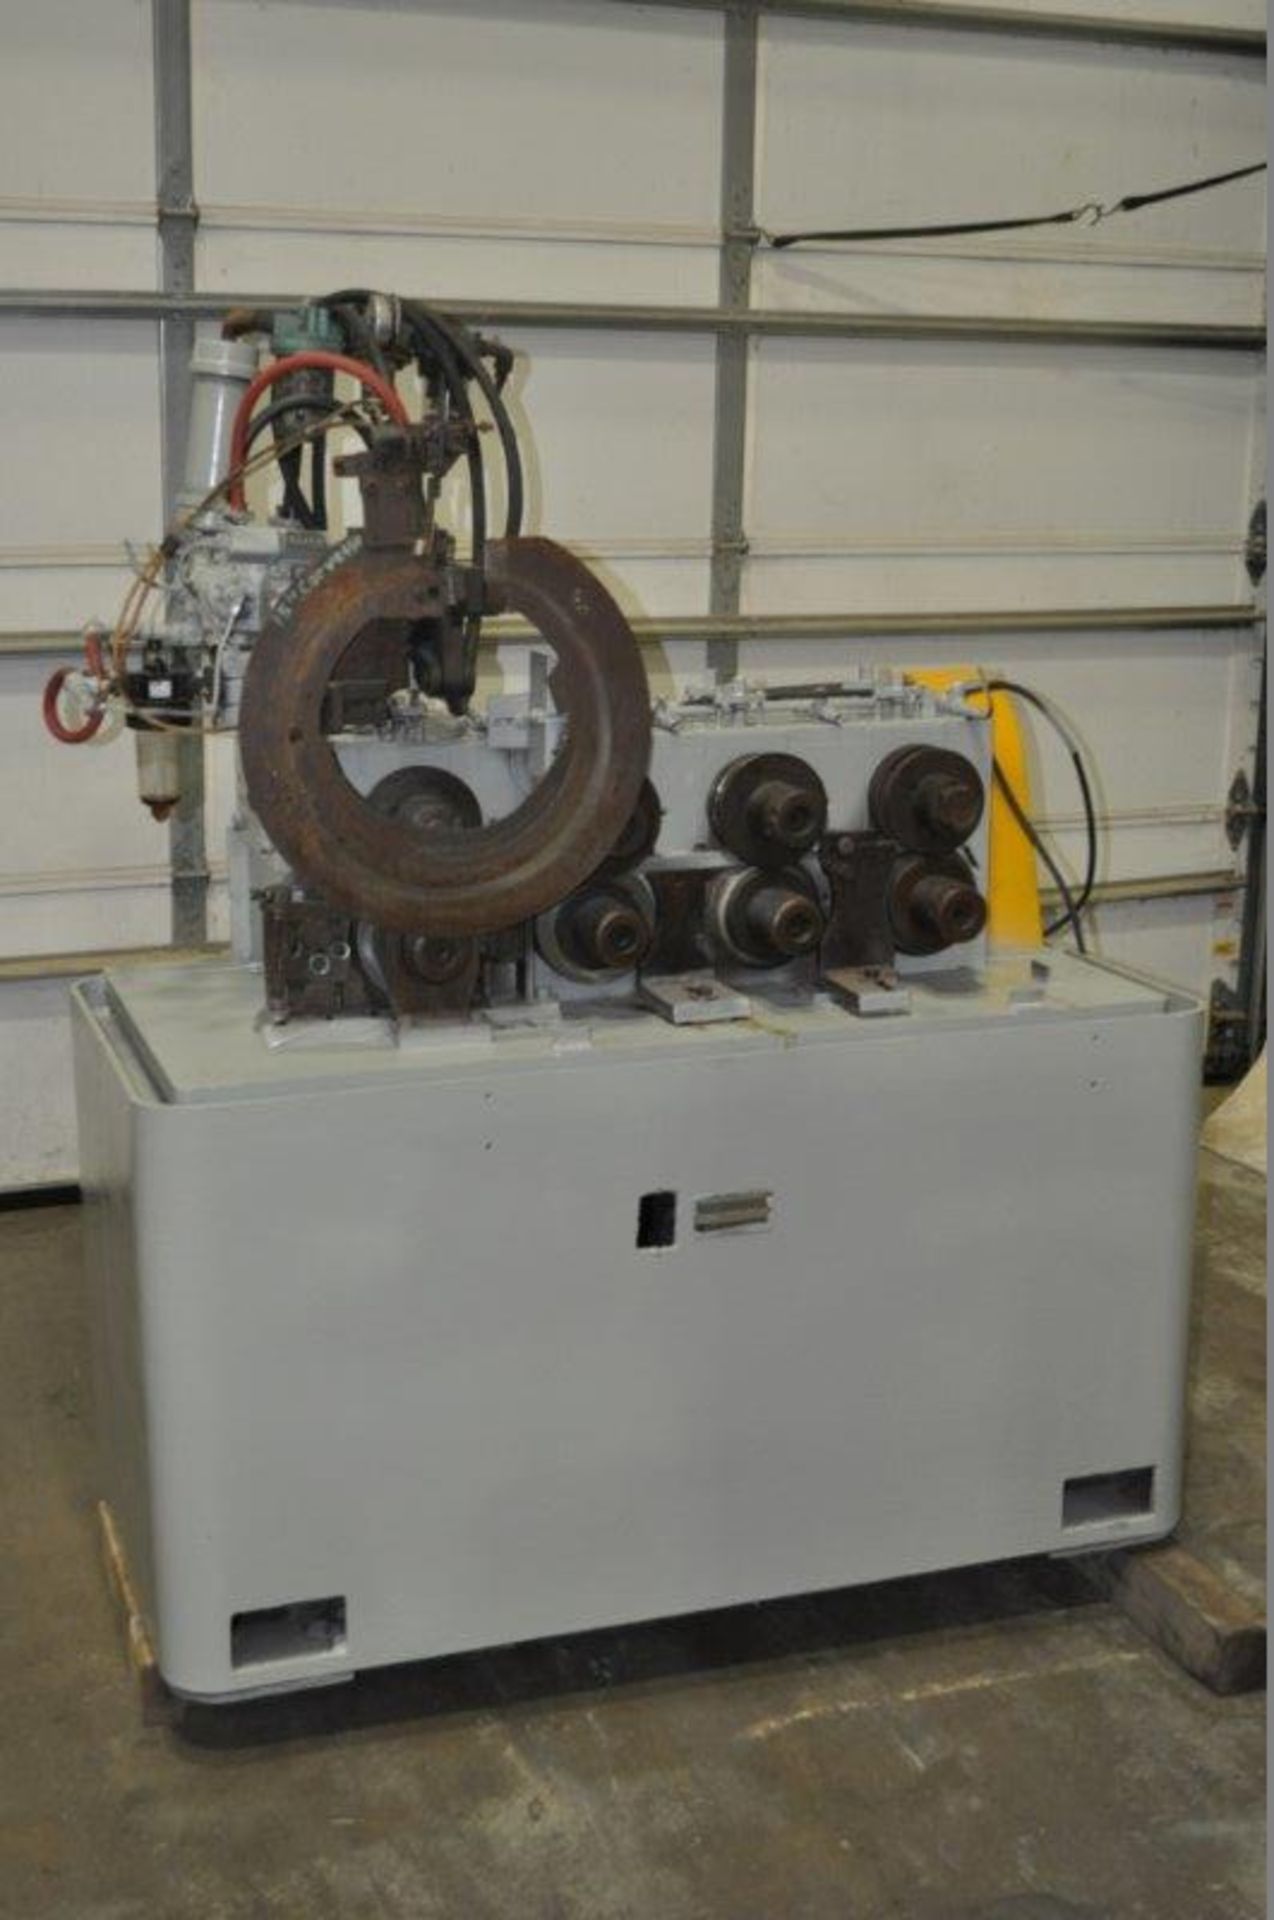 DEXTER 4-STAND RING ROLLING ROLL FORMER; S/N R-3111, 2.125" DIA. SHAFTS, 5" ROLL SPACE, 9"